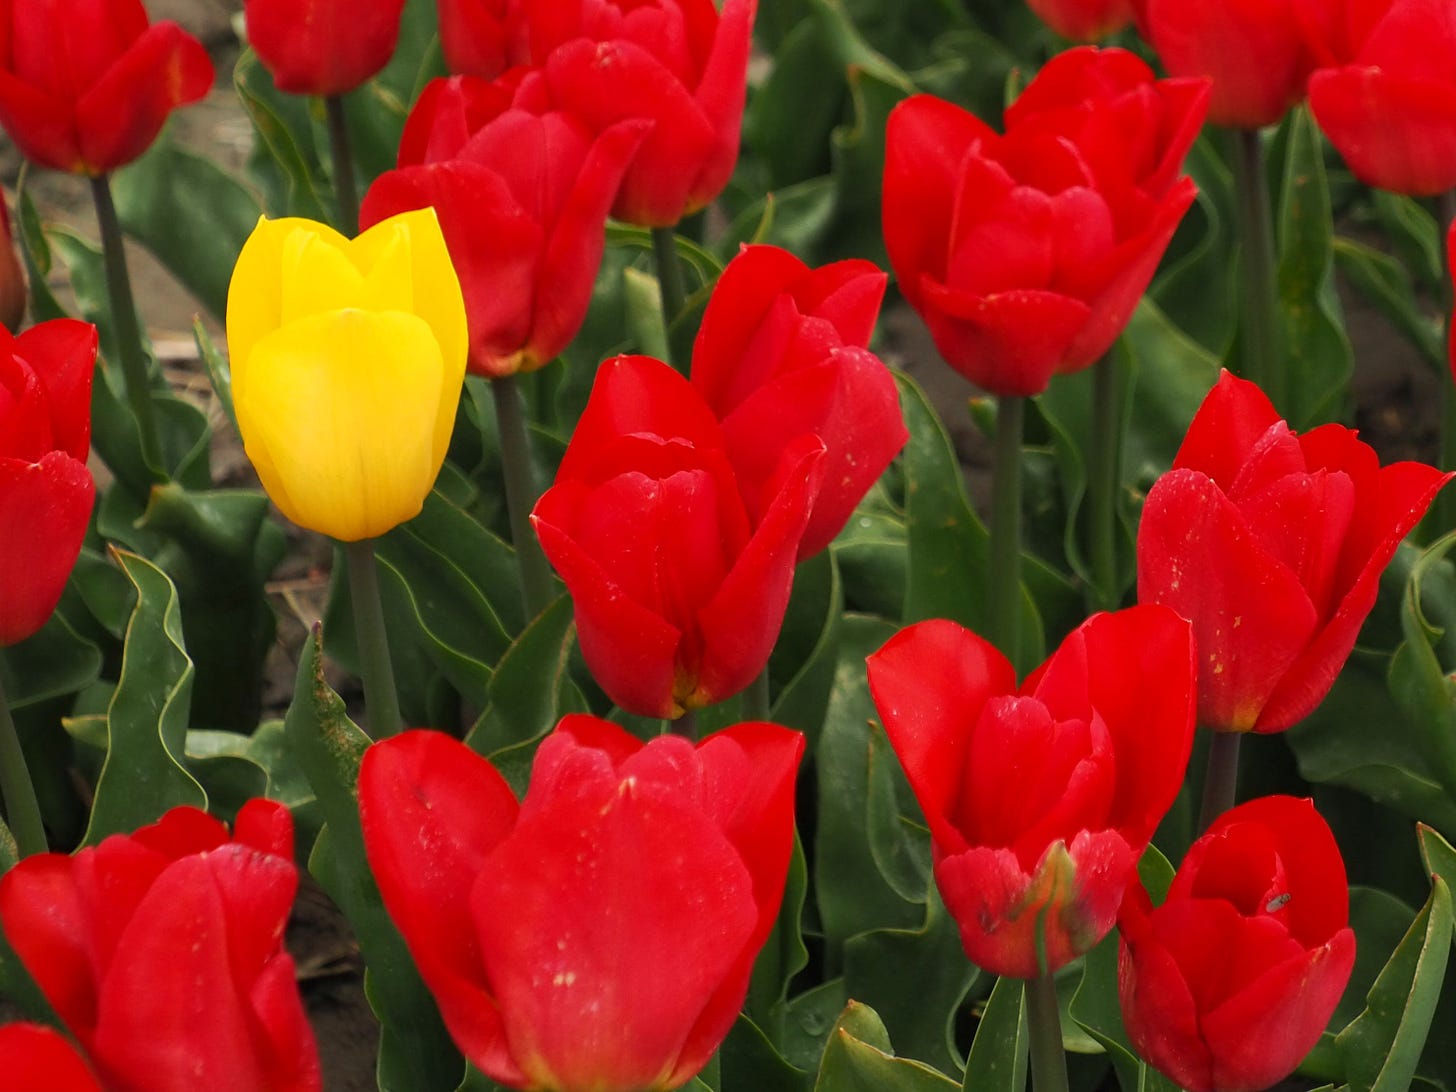 In a planting of bright red tulips, one yellow tulip.